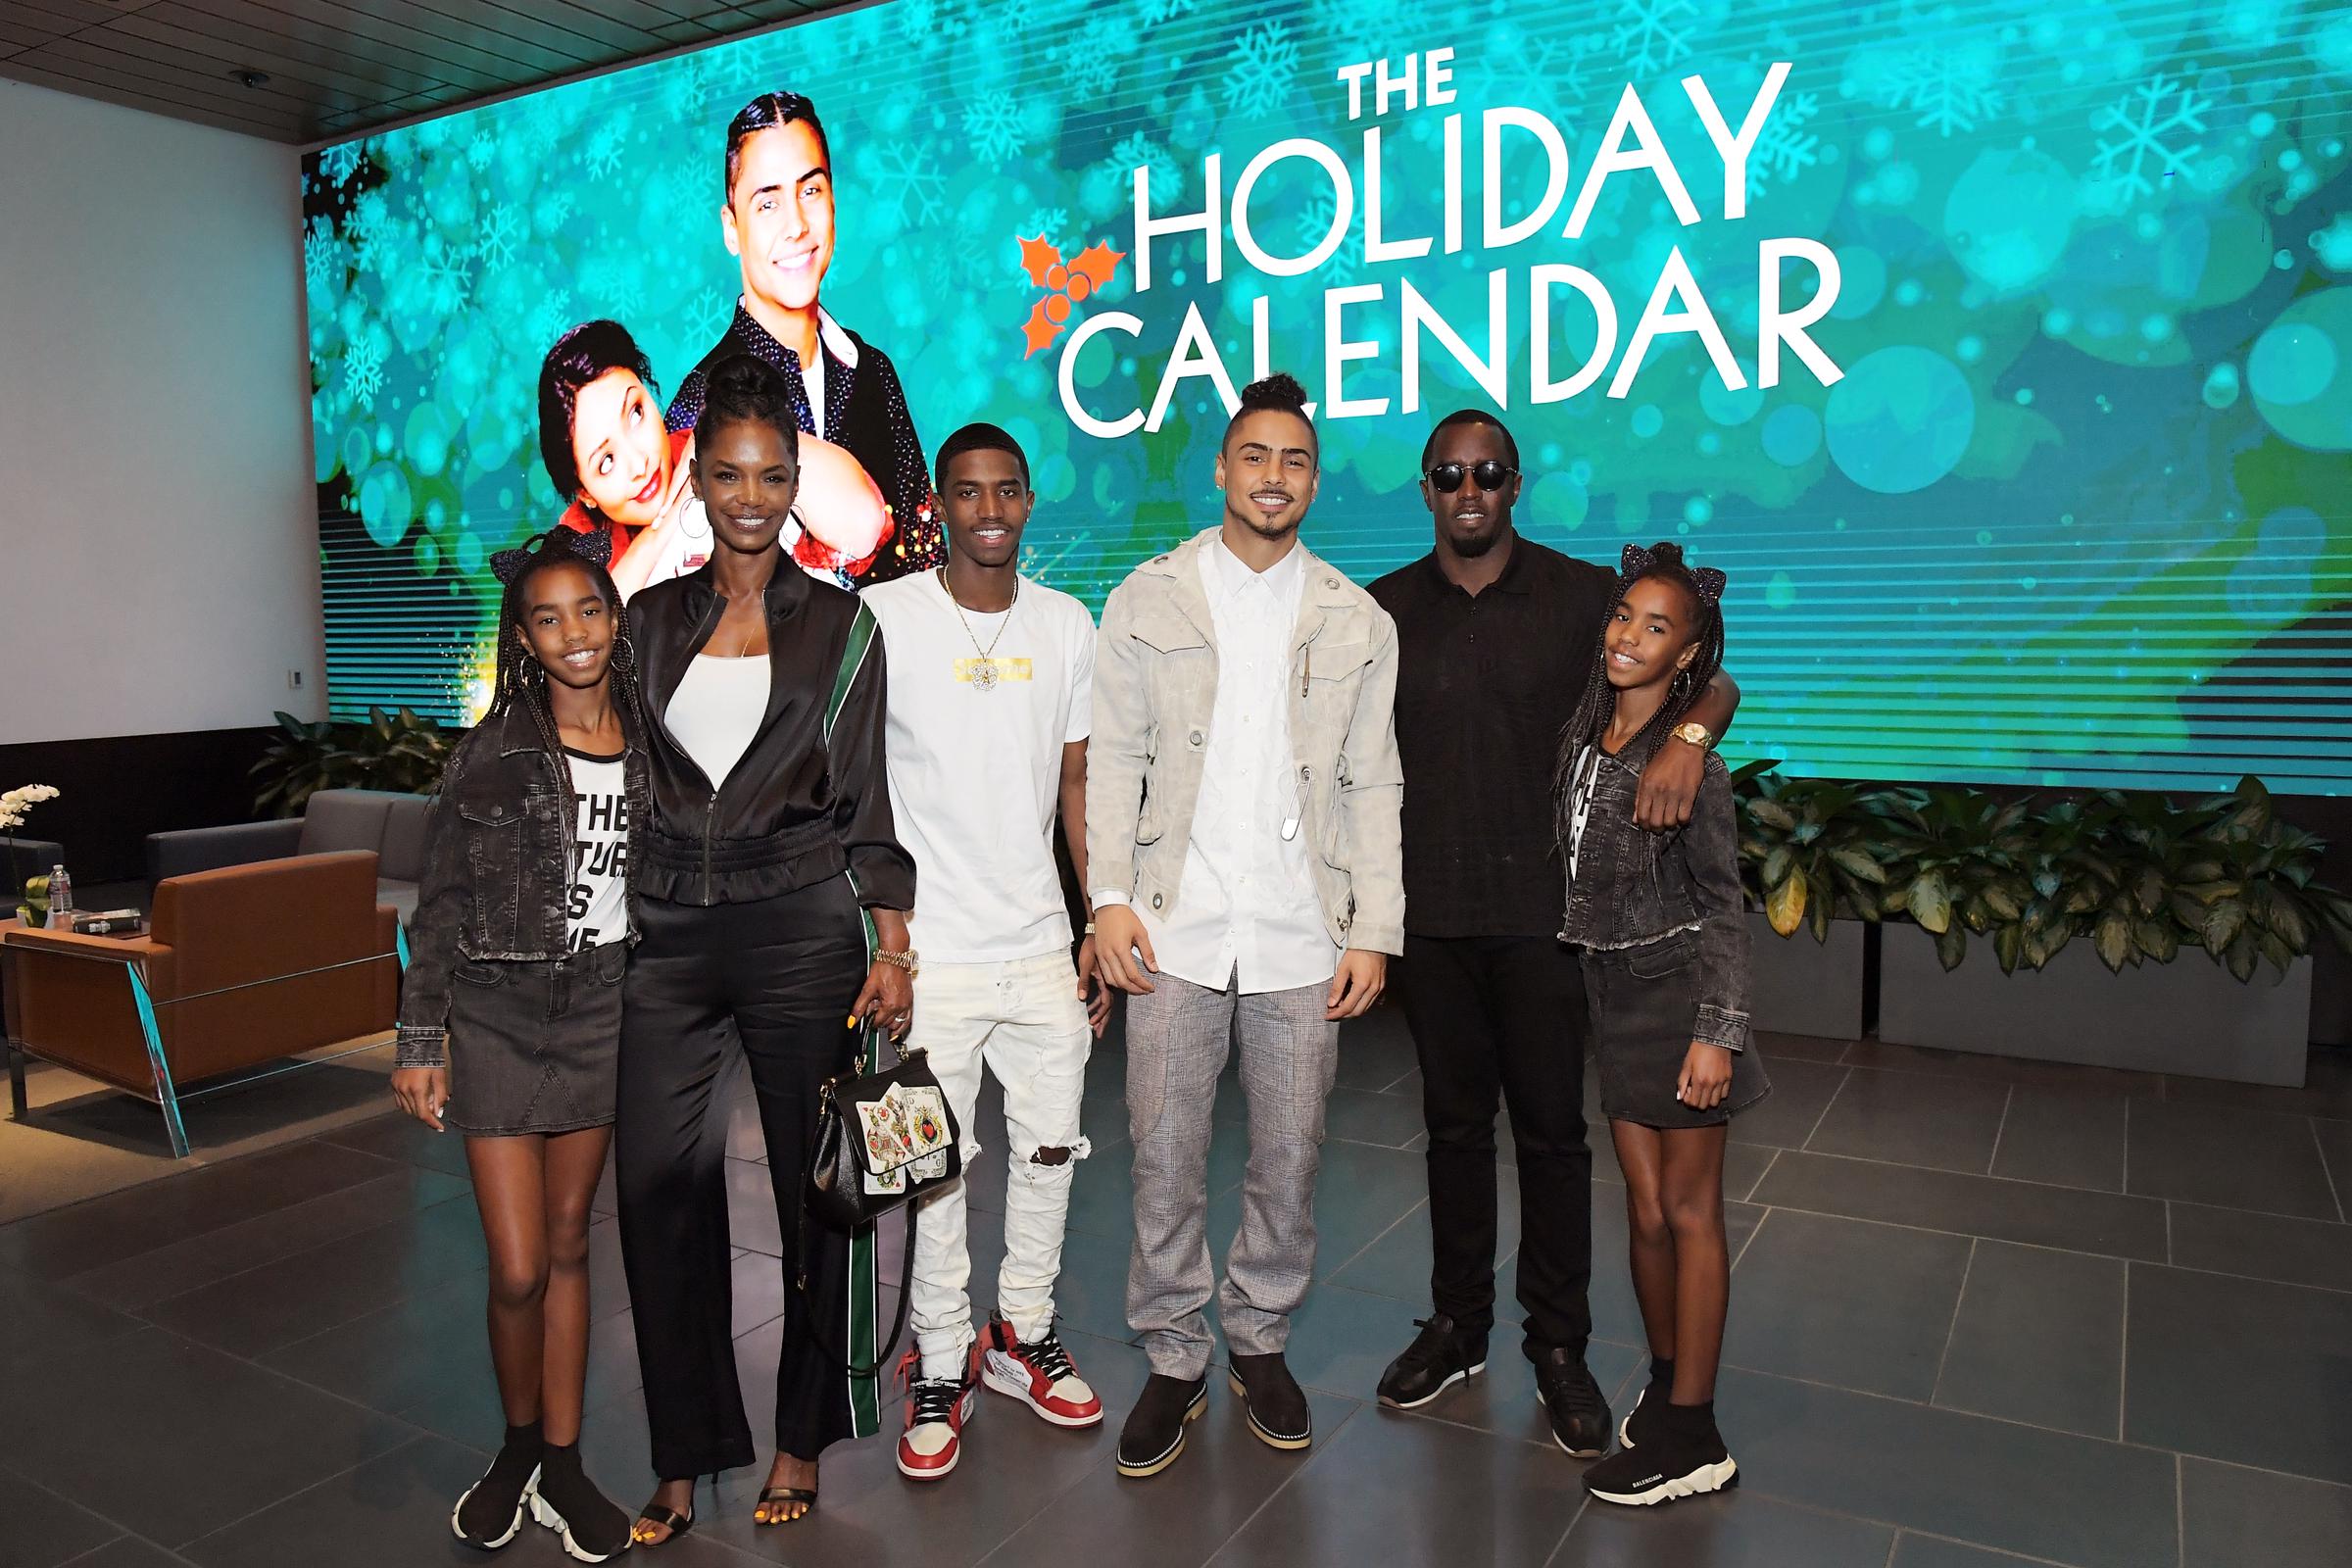 (L-R) Kim Porter, Christian Casey Combs, Quincy Brown, Sean "Diddy" Combs, D'Lila Star Combs and Jessie James Combs attend "The Holiday Calendar" special screening Los Angeles on October 30, 2018 in Los Angeles, California. | Source: Getty Images